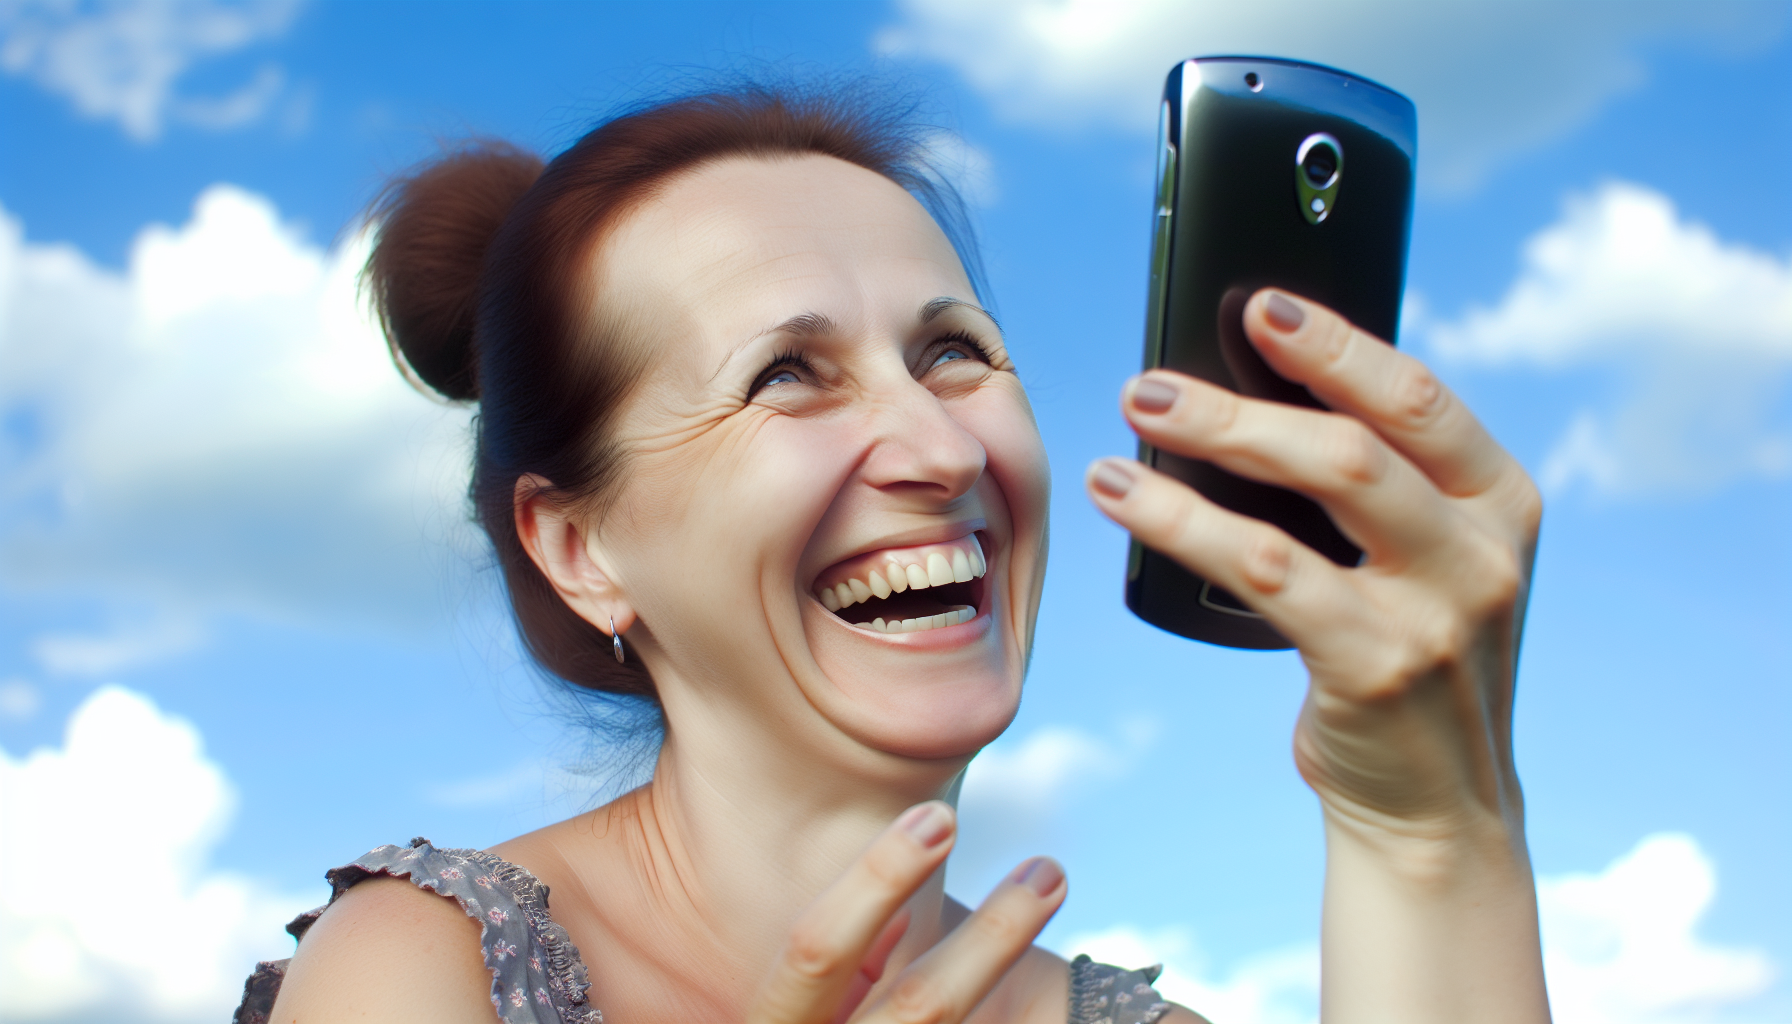 Smiling woman holding a cell phone